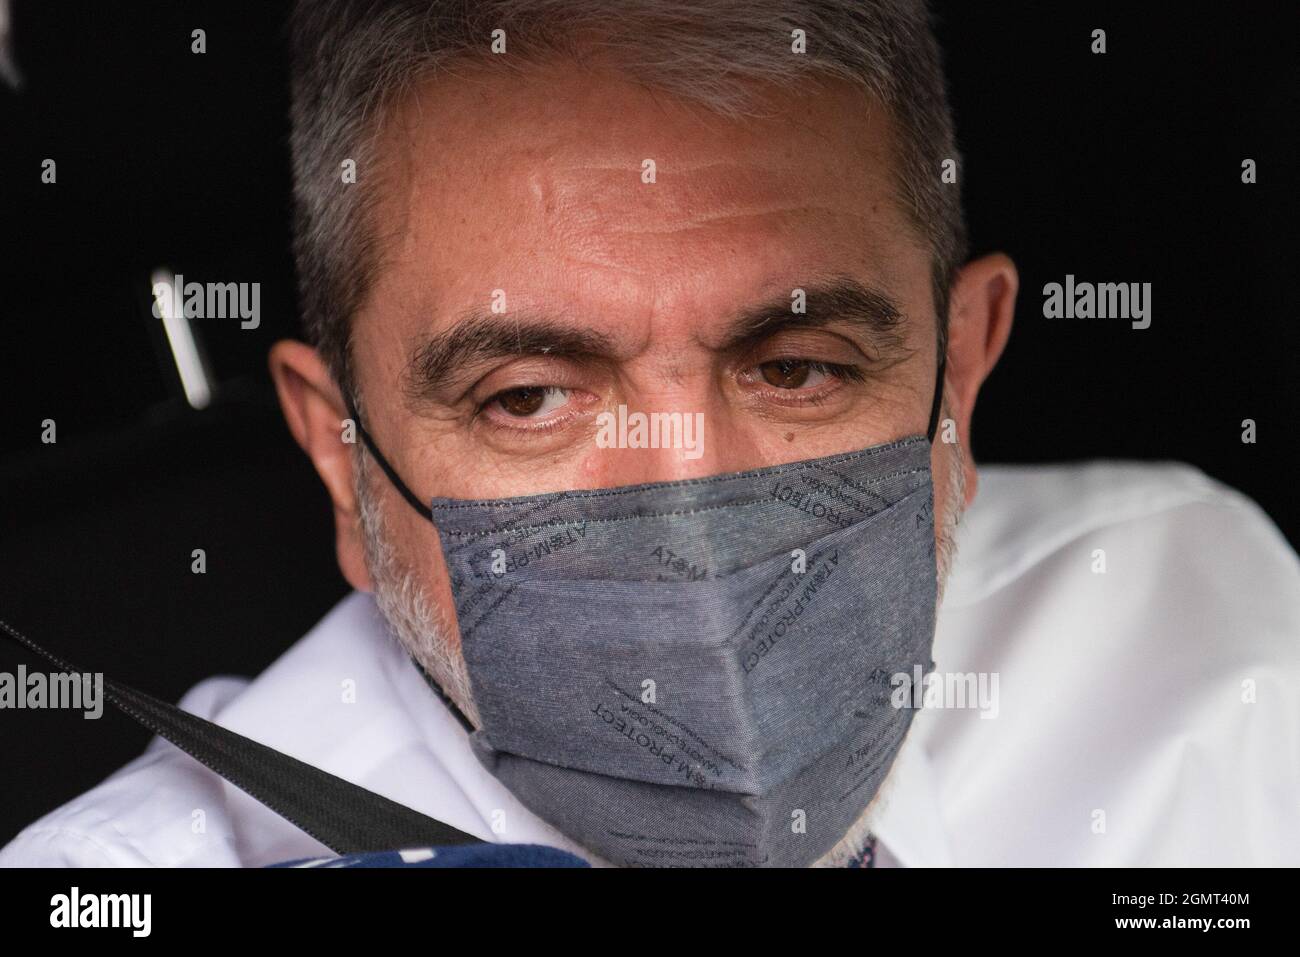 Buenos Aires, Argentina. 12th Feb, 2015. Argentina's Security minister Anibal Fernandez speaks to the press after taking an oath.After the Political Crisis of the Government of Alberto Fernandez in Argentina, ministers and officials were present at the swearing-in of the new Ministers held at the Government House in Buenos Aires, Argentina. (Credit Image: © Manuel Cortina/SOPA Images via ZUMA Press Wire) Stock Photo